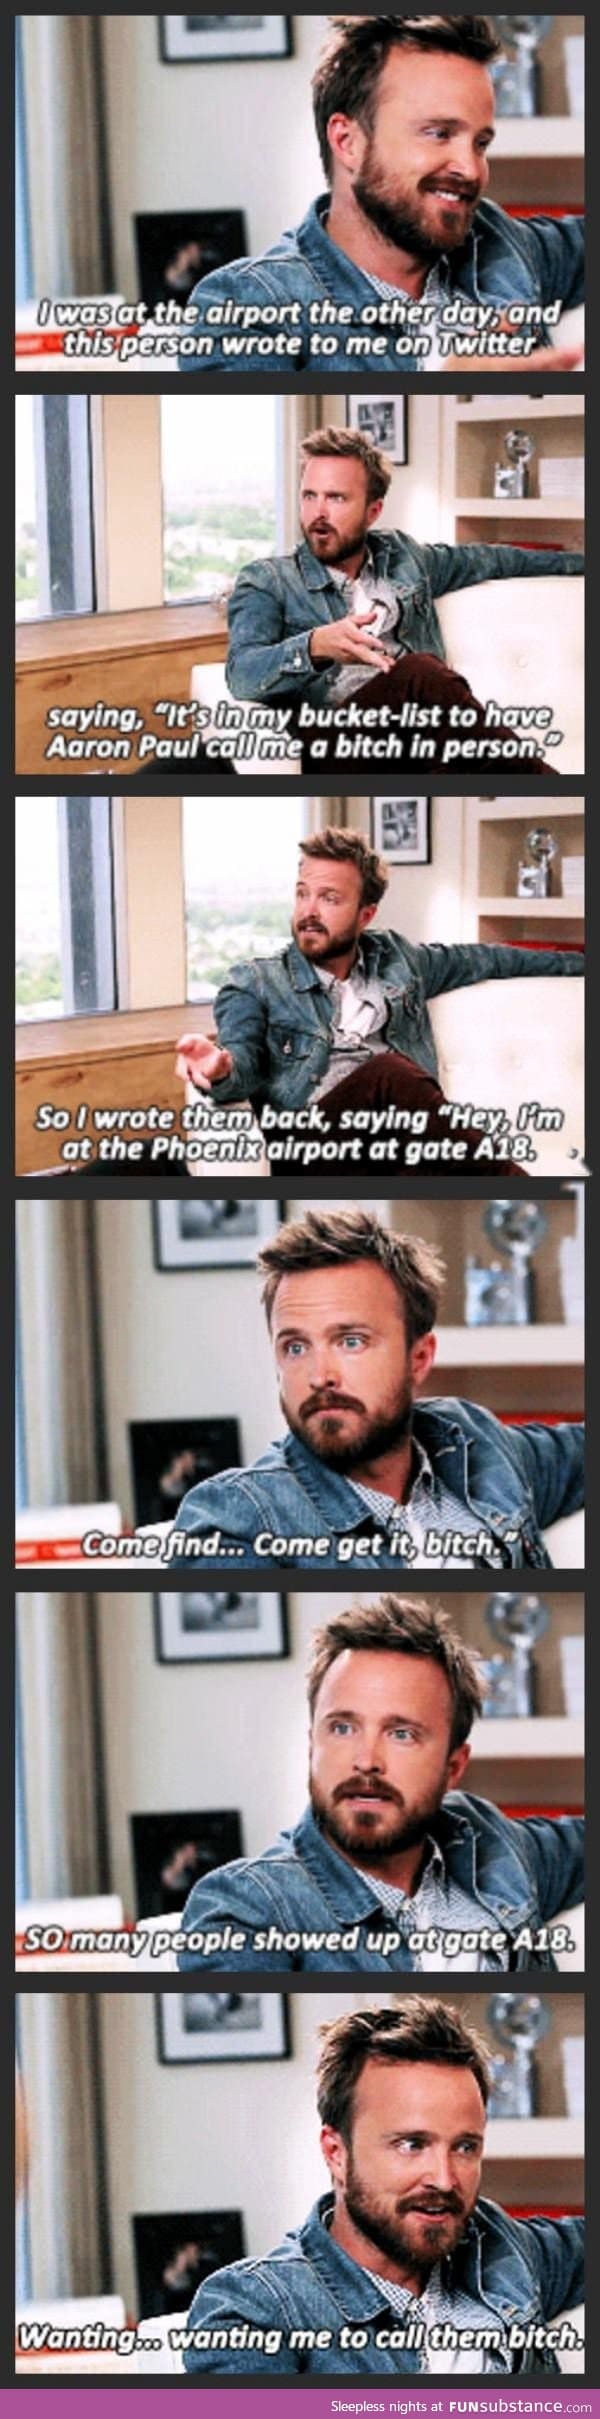 Aaron Paul just wanted to fulfill a bucket list wish for a fan